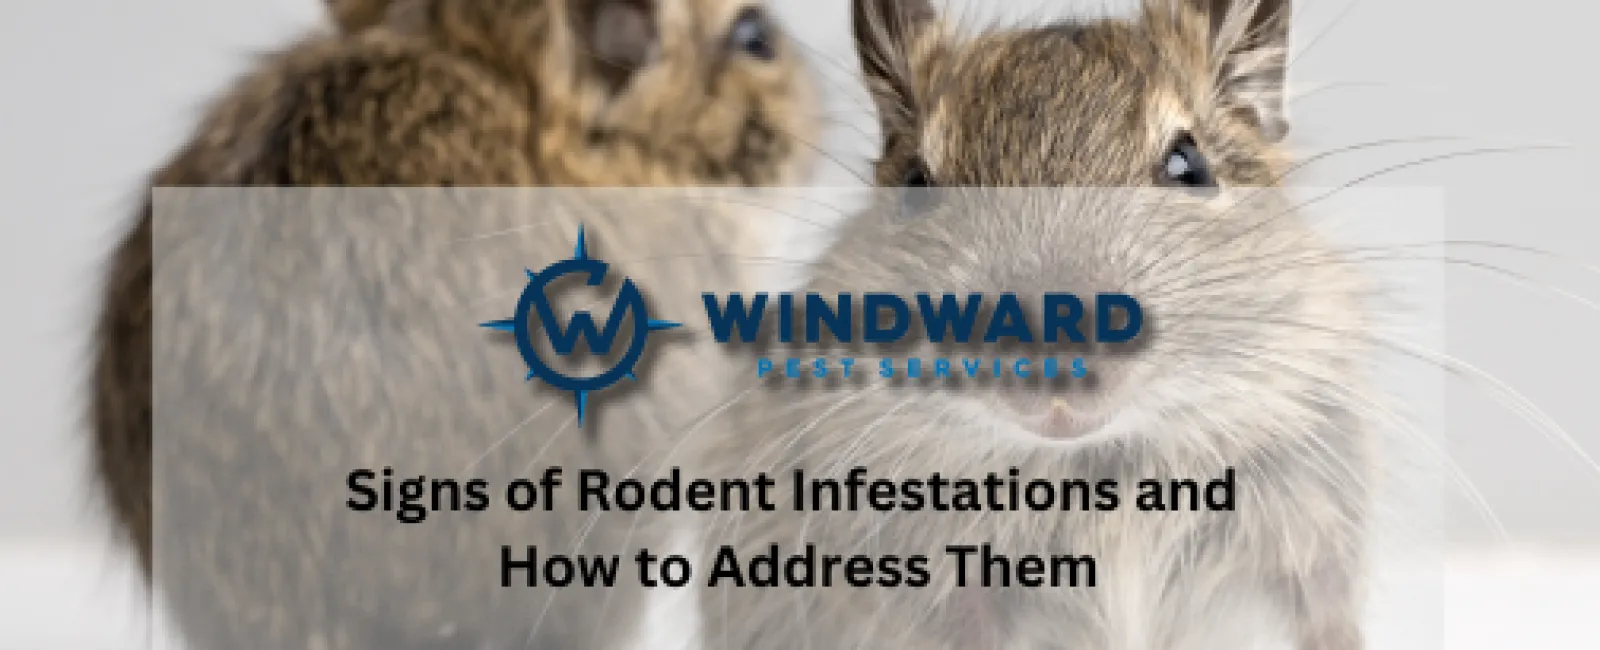 Signs of Rodent Infestations and How to Address Them